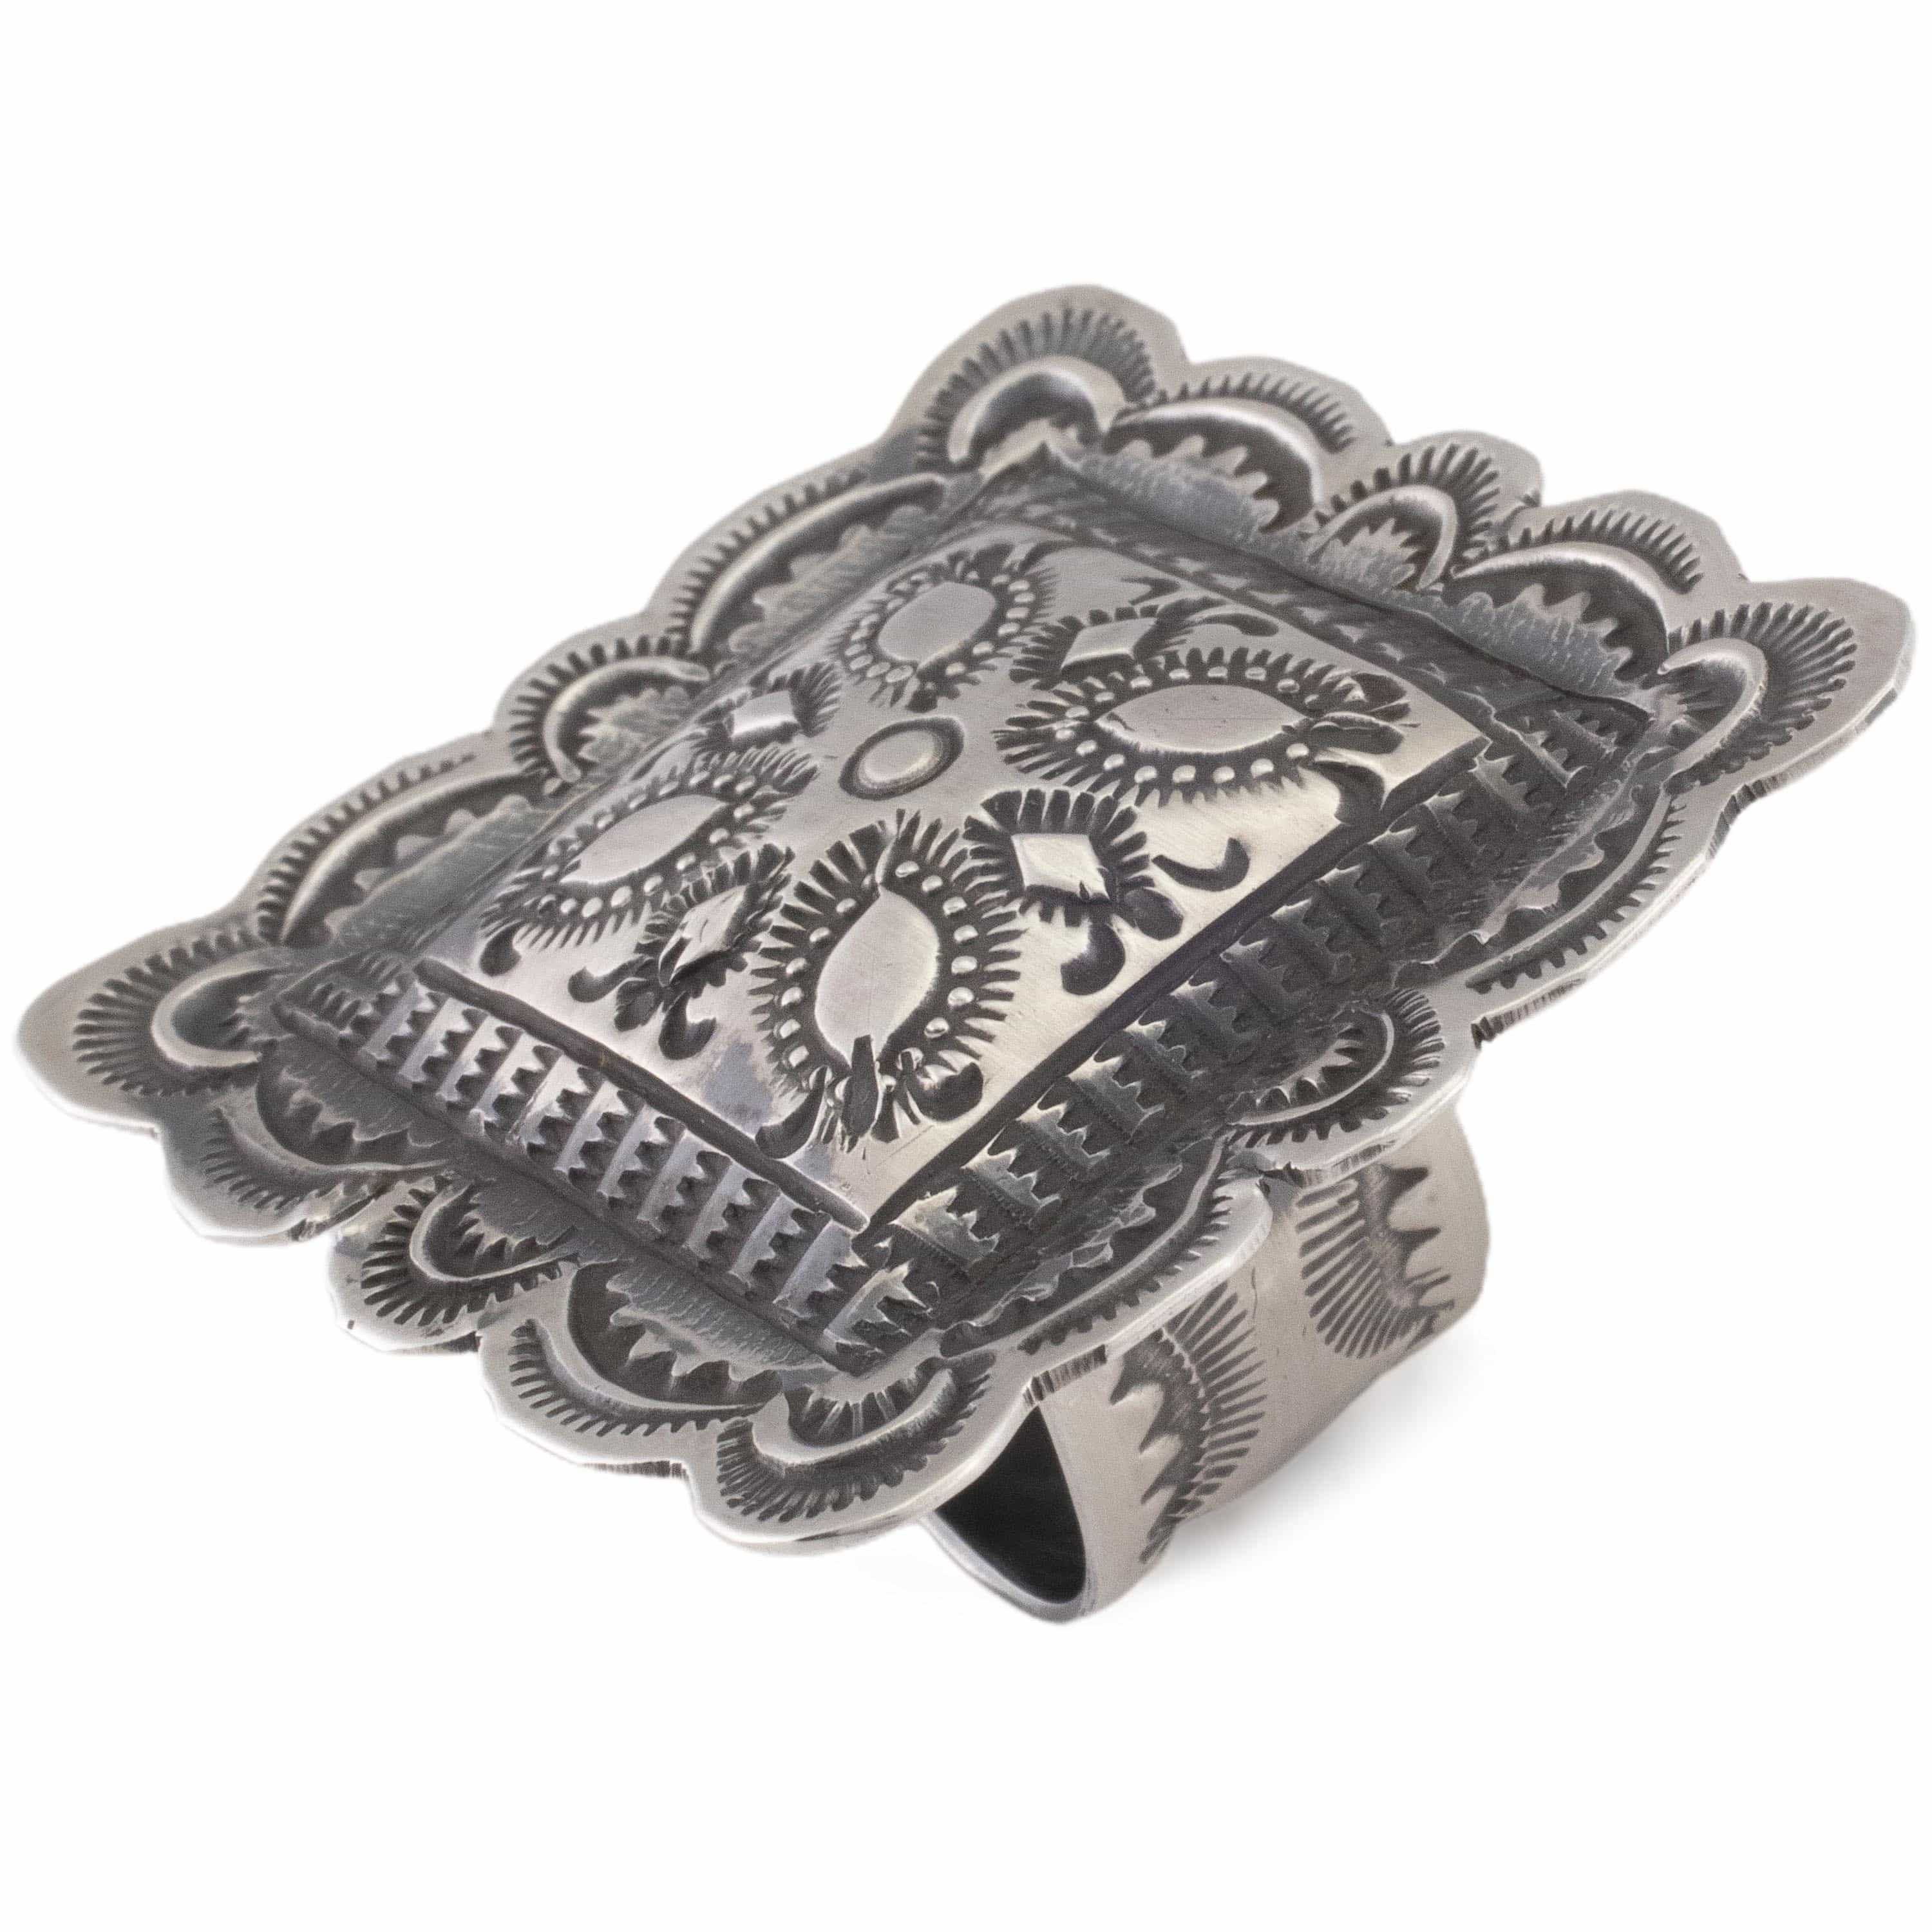 Kalifano Native American Jewelry ADJUSTABLE Vincent Platero Navajo Adjustable USA Native American Made 925 Sterling Silver Ring NAR700.025.ADJ